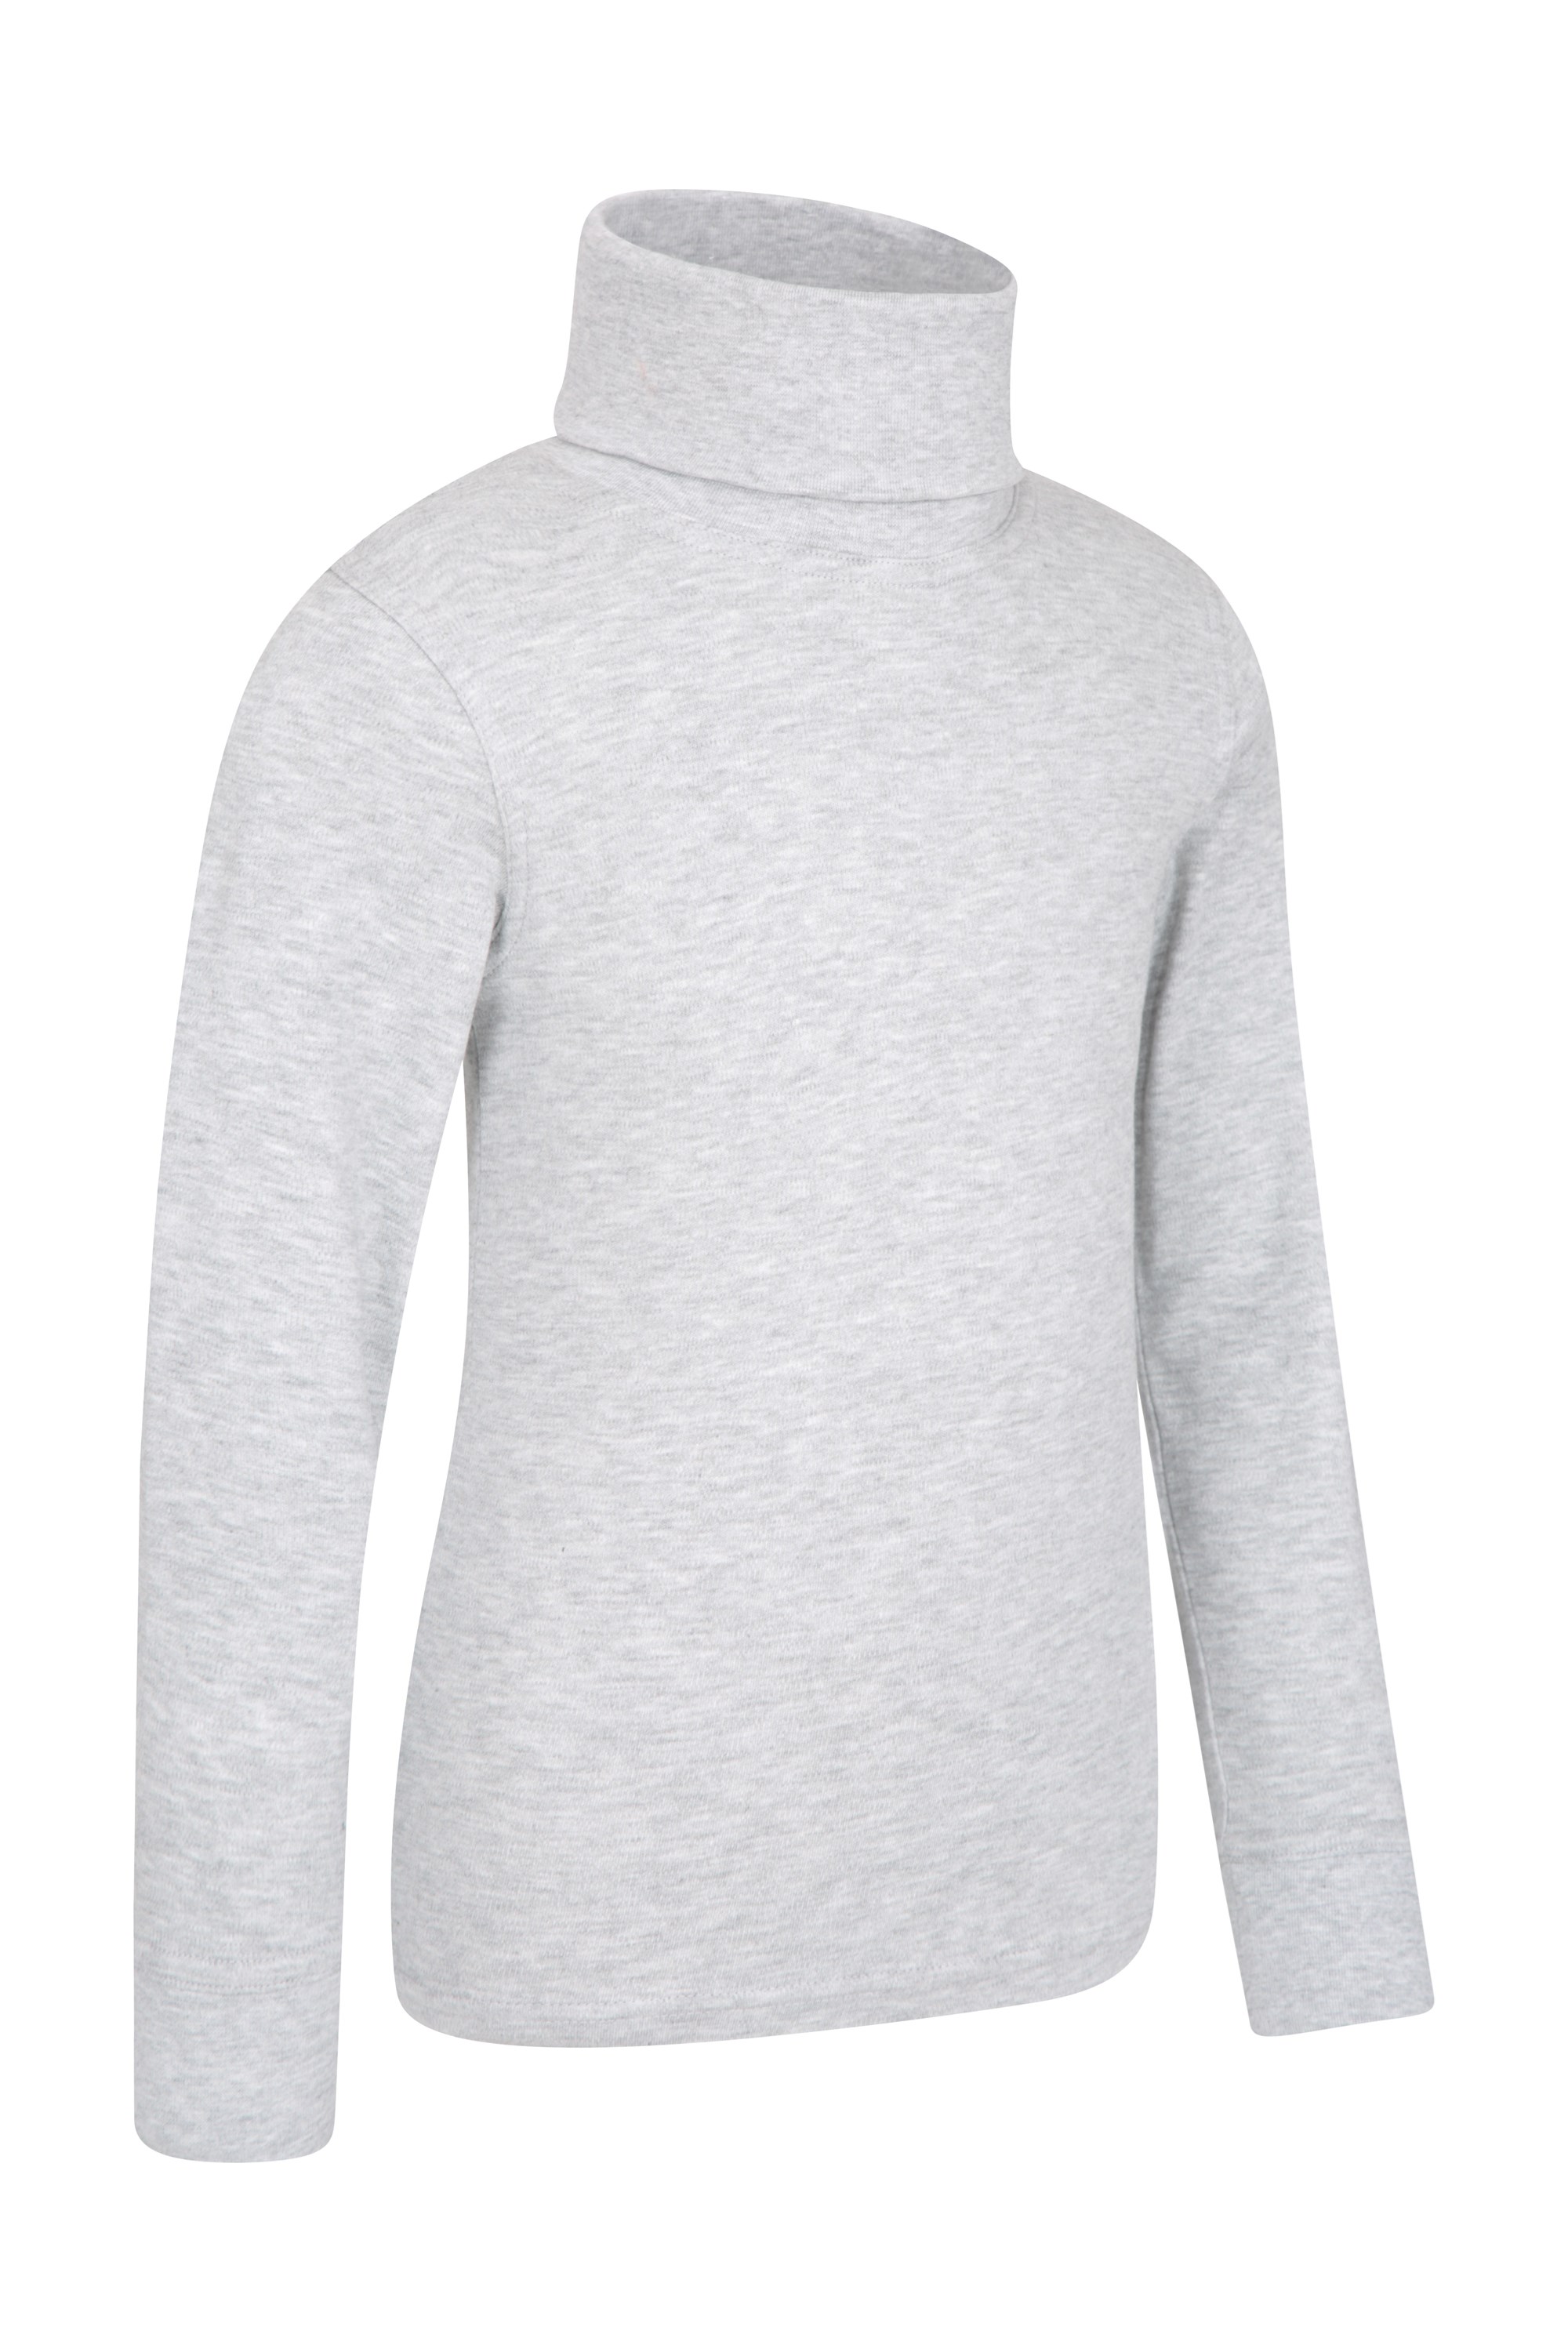 Lightweight Breathable Extremely Soft 100% Cotton Thermal Baselayer Mountain Warehouse Meribel Kids Cotton Roll Neck Top Perfect for Children This Winter 